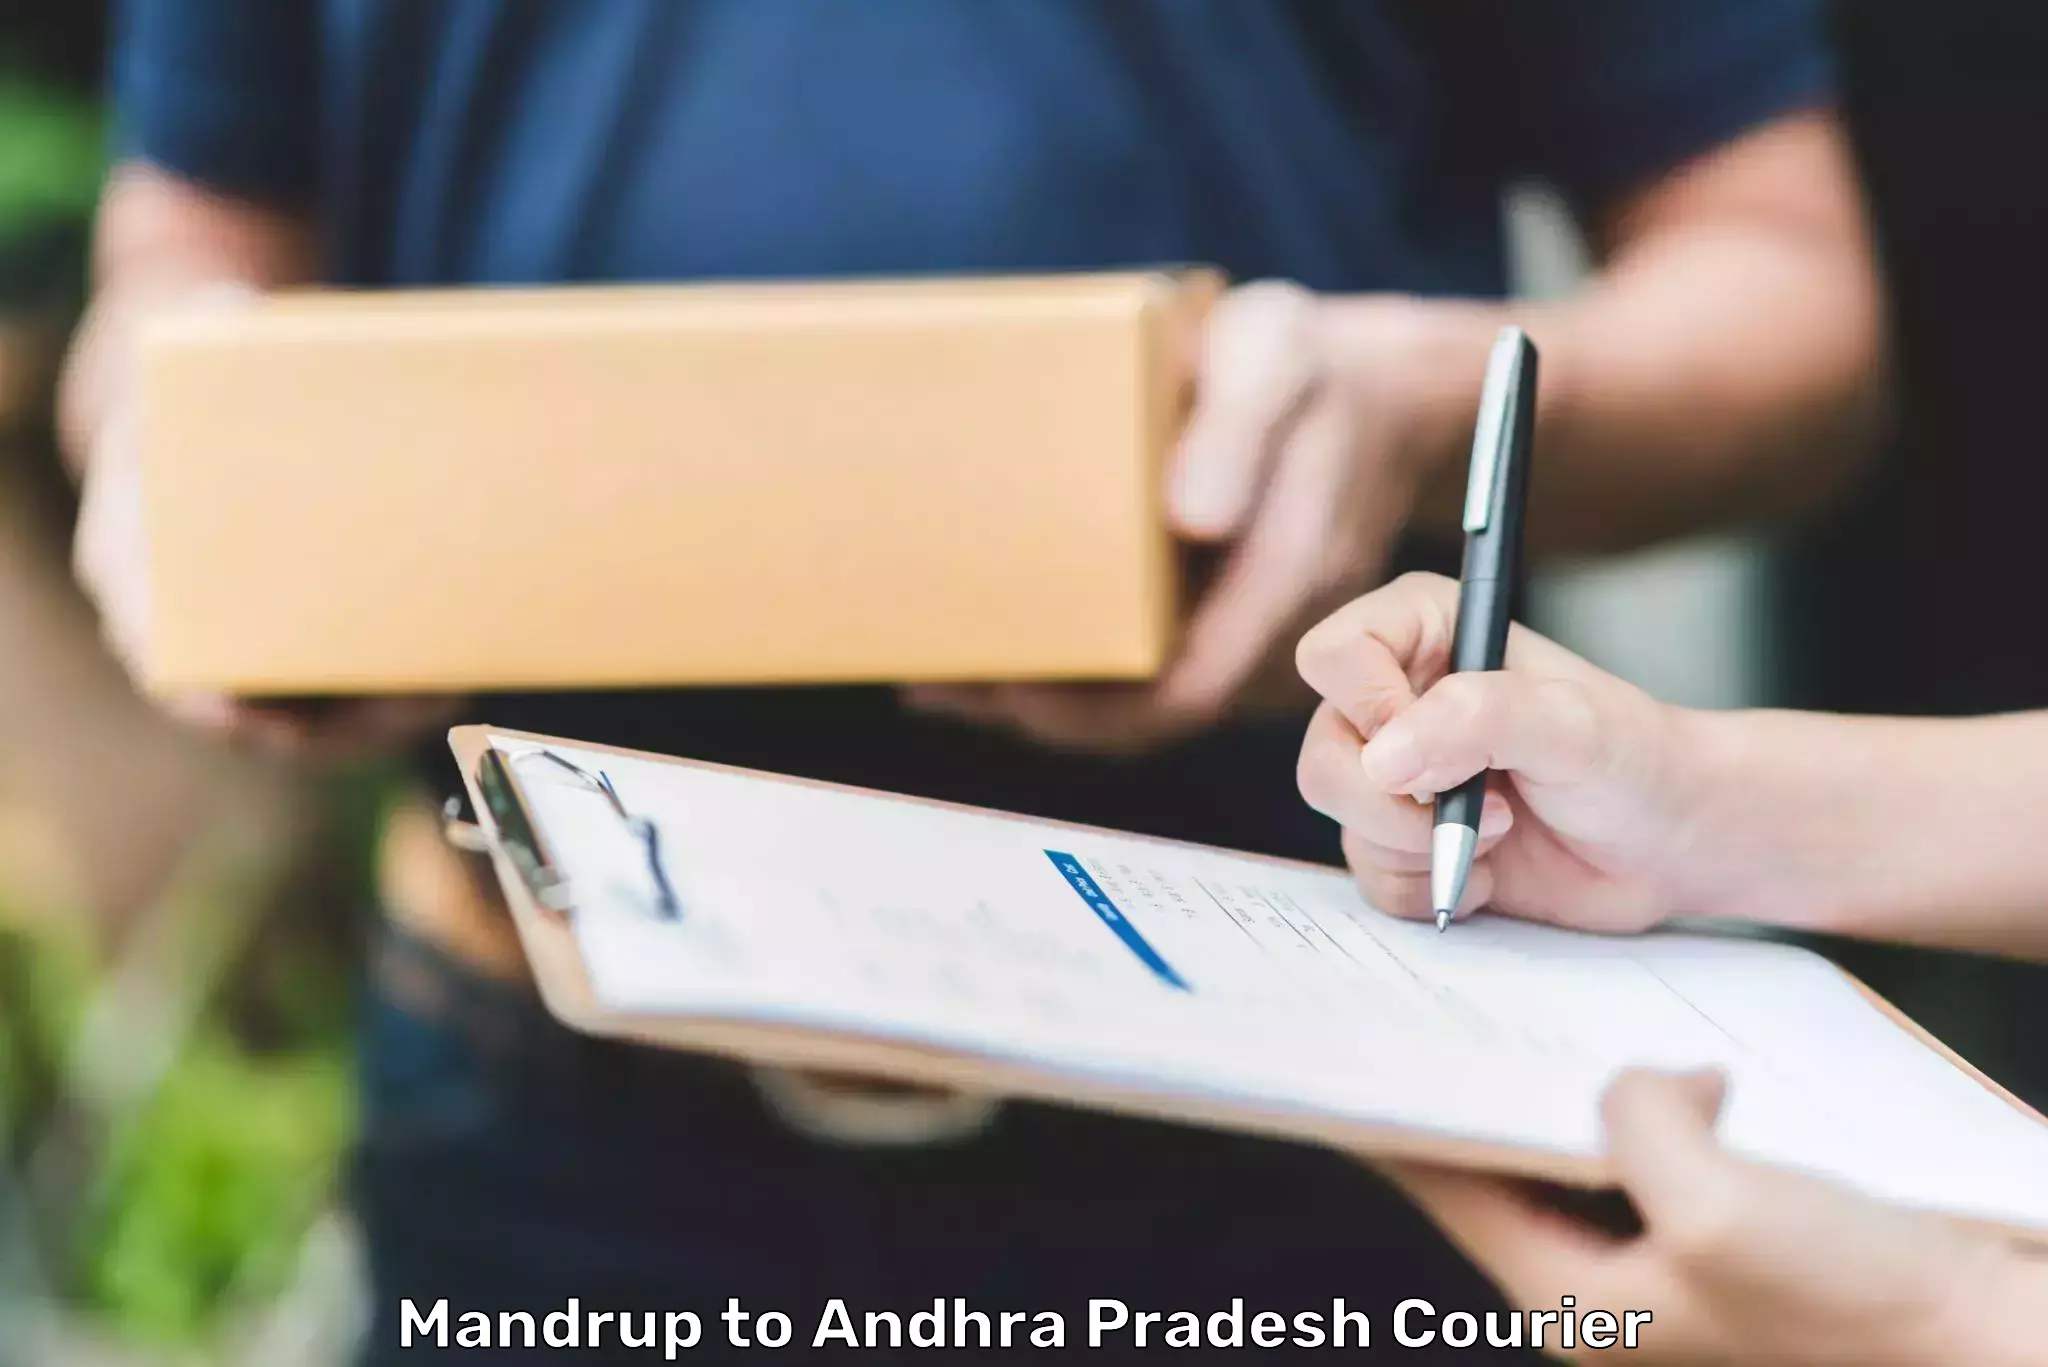 Advanced tracking systems Mandrup to Guntur